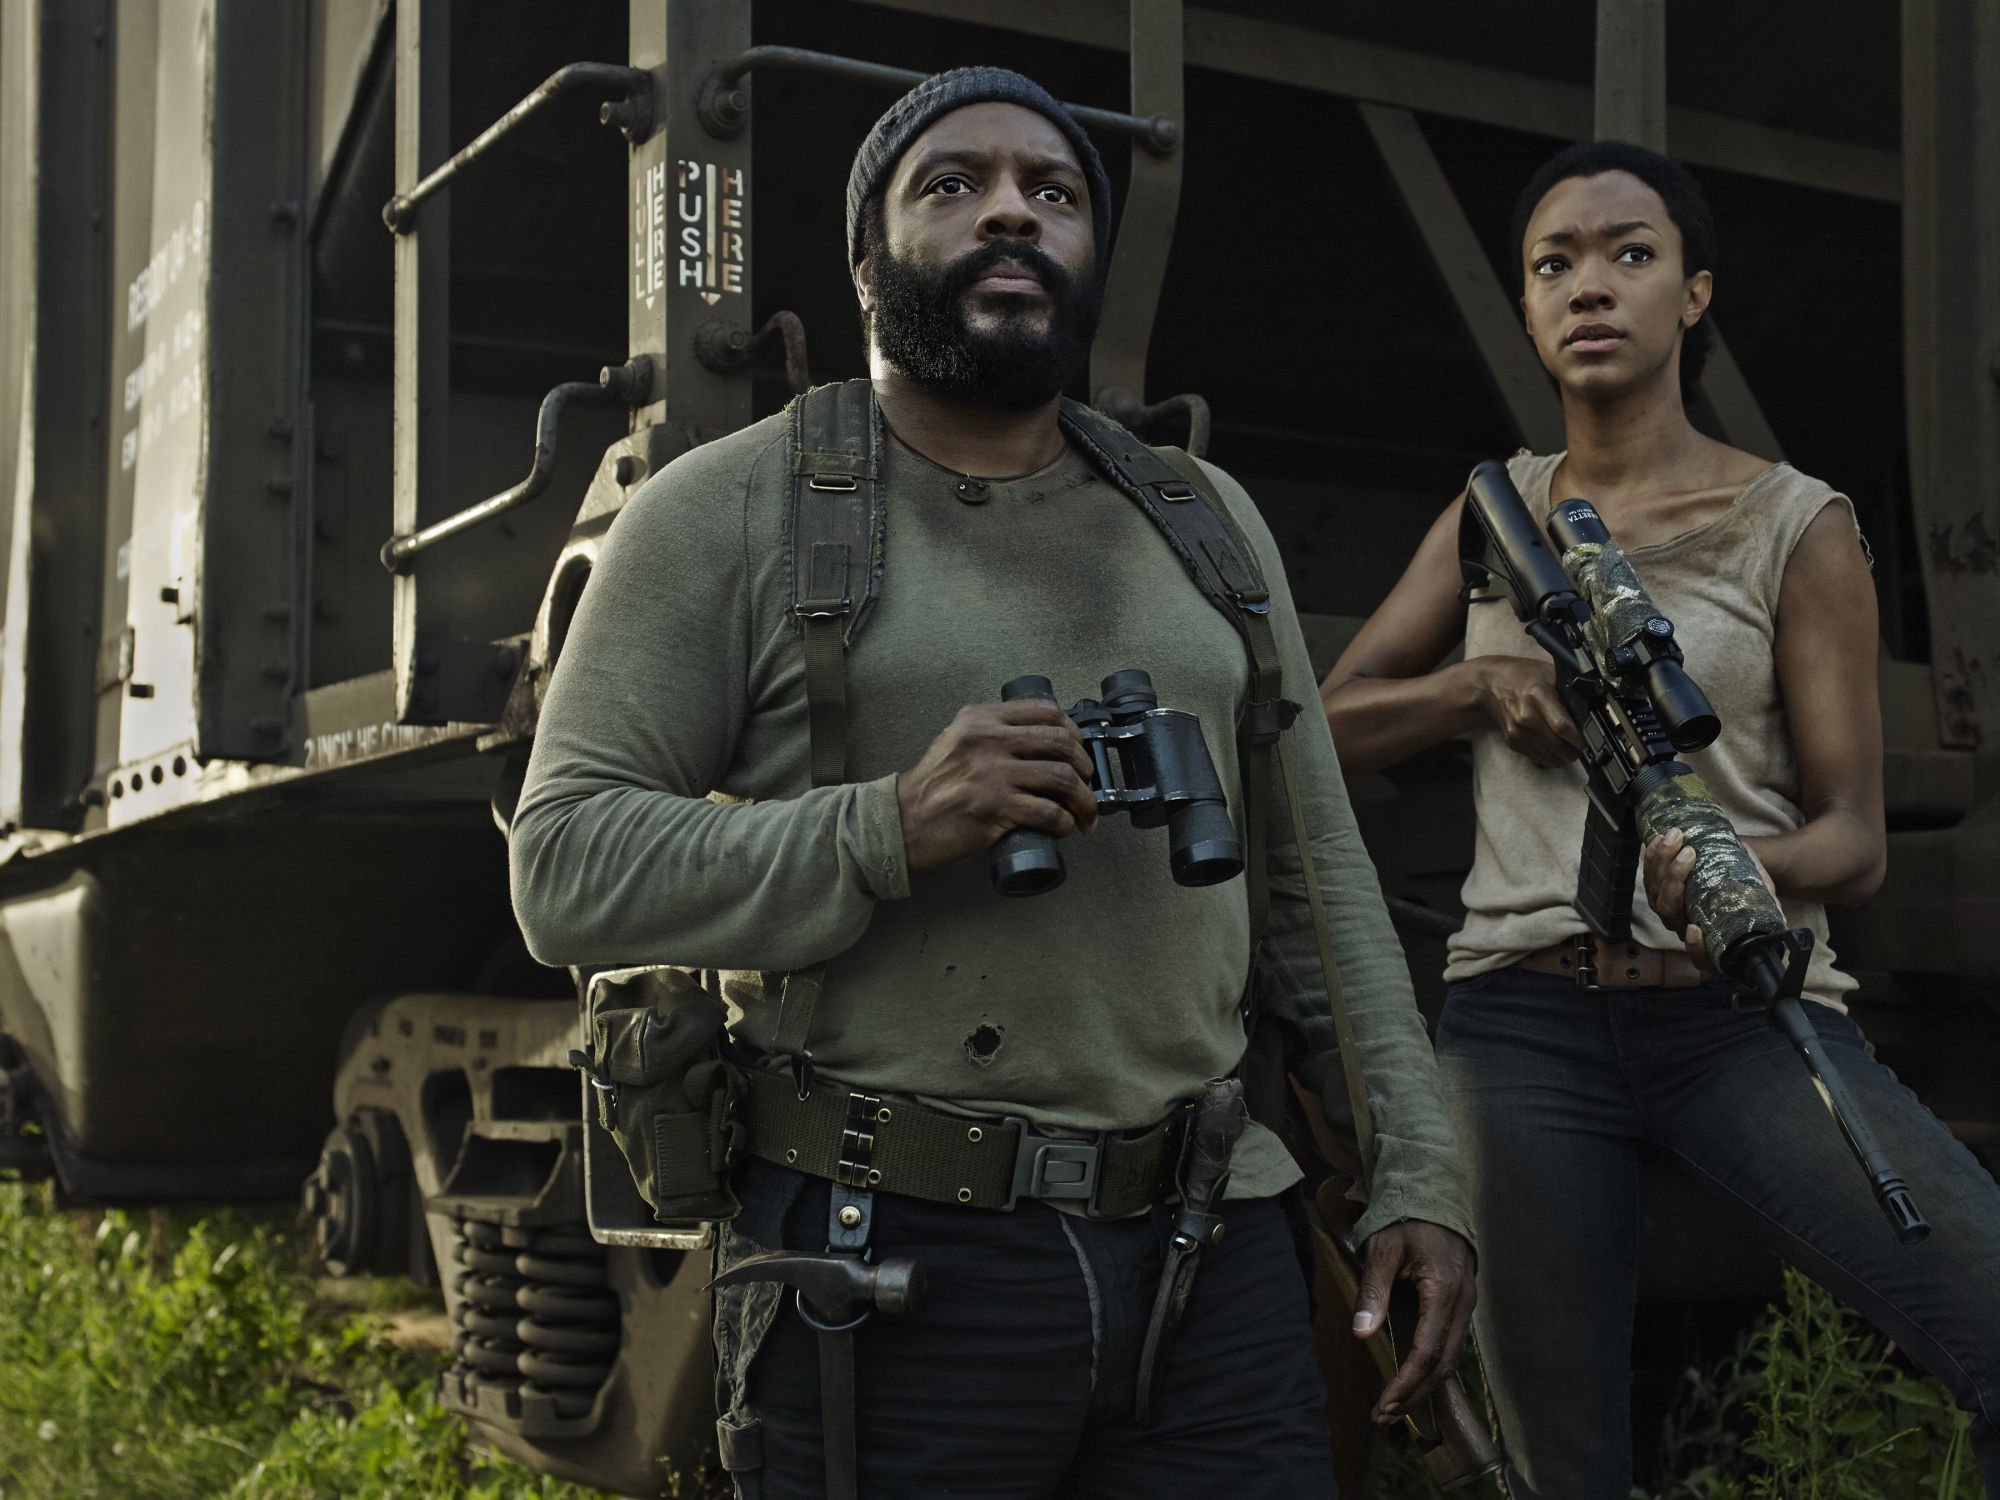 the, Walking, Dead, Tyreese, And, Sasha Wallpaper